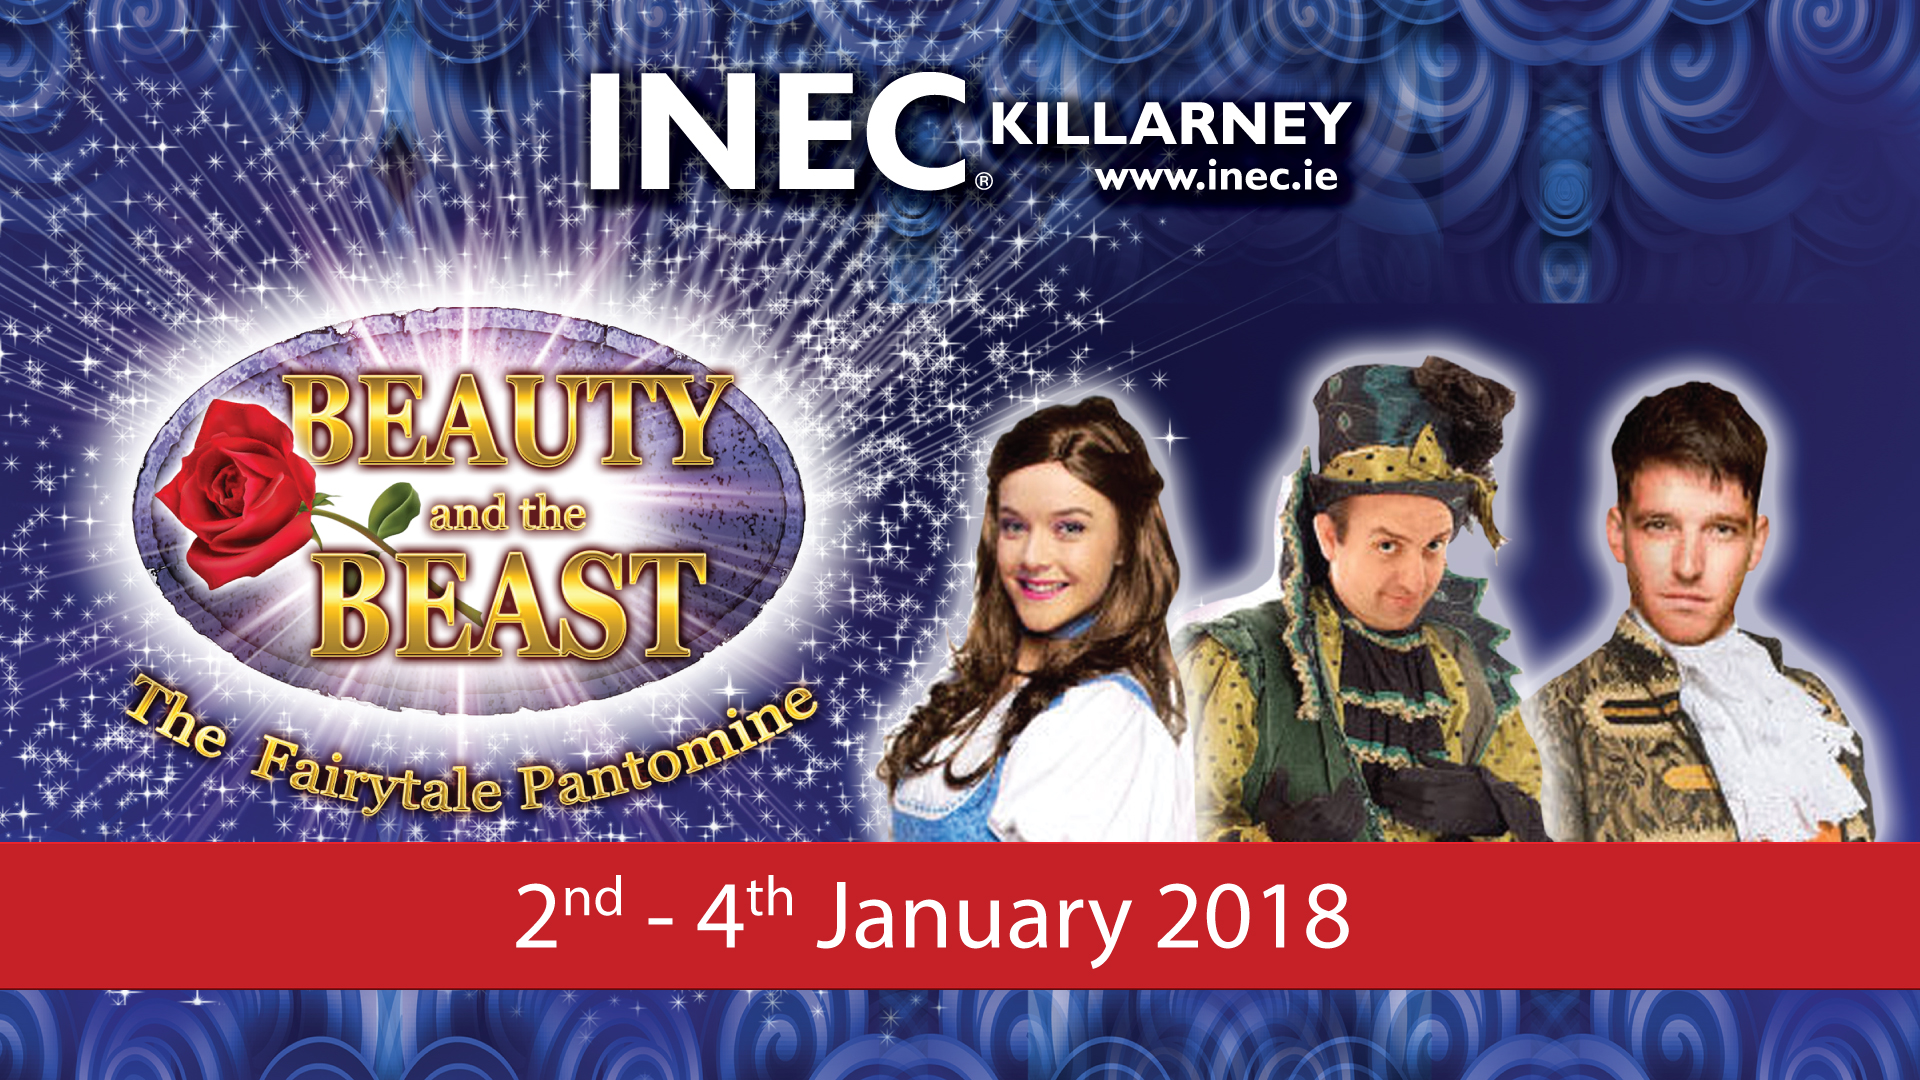 Killarney's first professional pantomime Beauty and the Beast comes to the INEC Killarney from Jan 2nd - 4th 2017